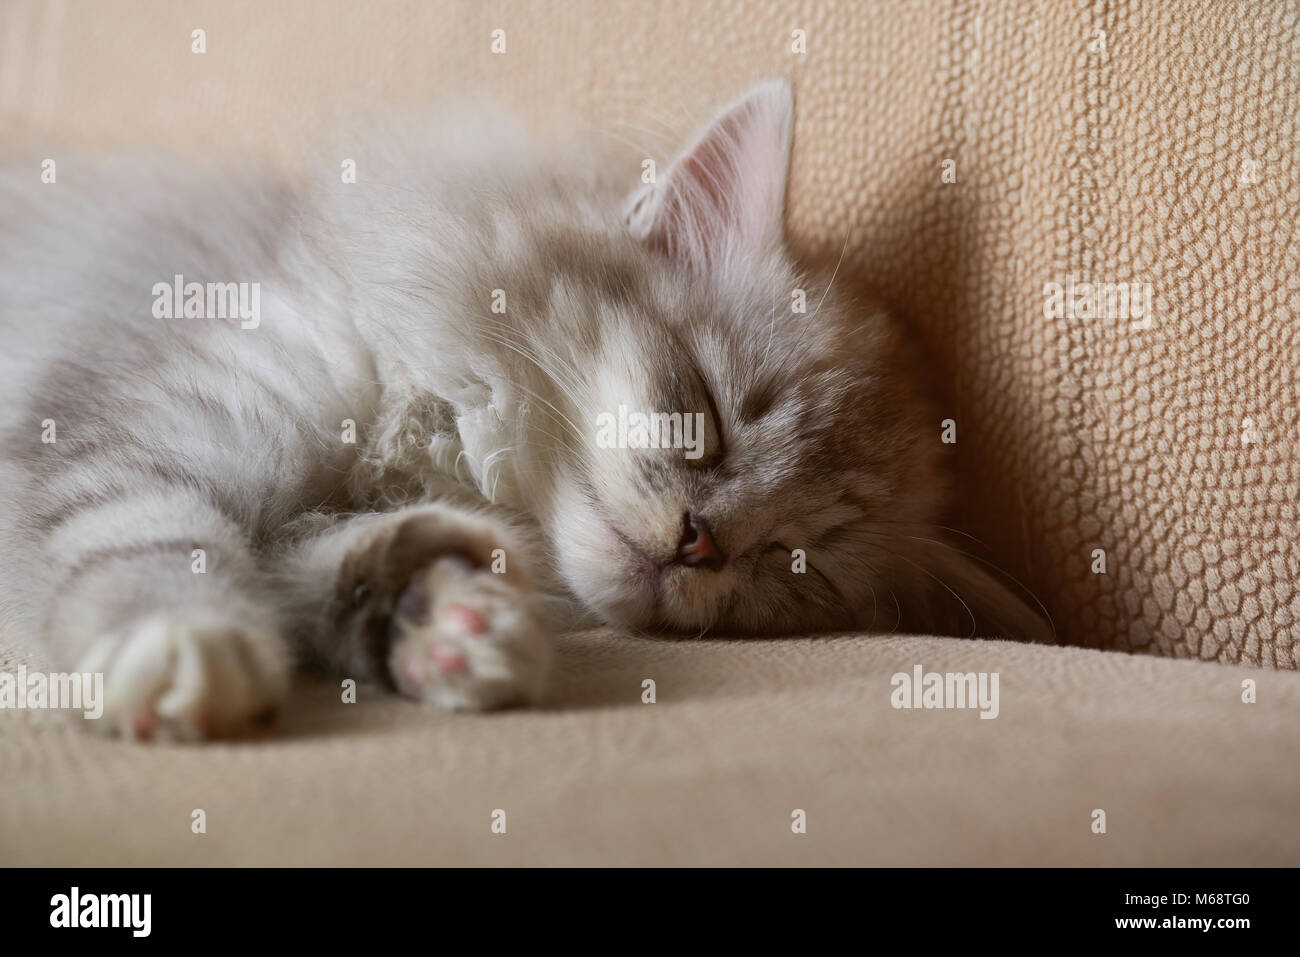 Close-up of sleeping kitty sur canapé marron. Chat gris moelleux Banque D'Images